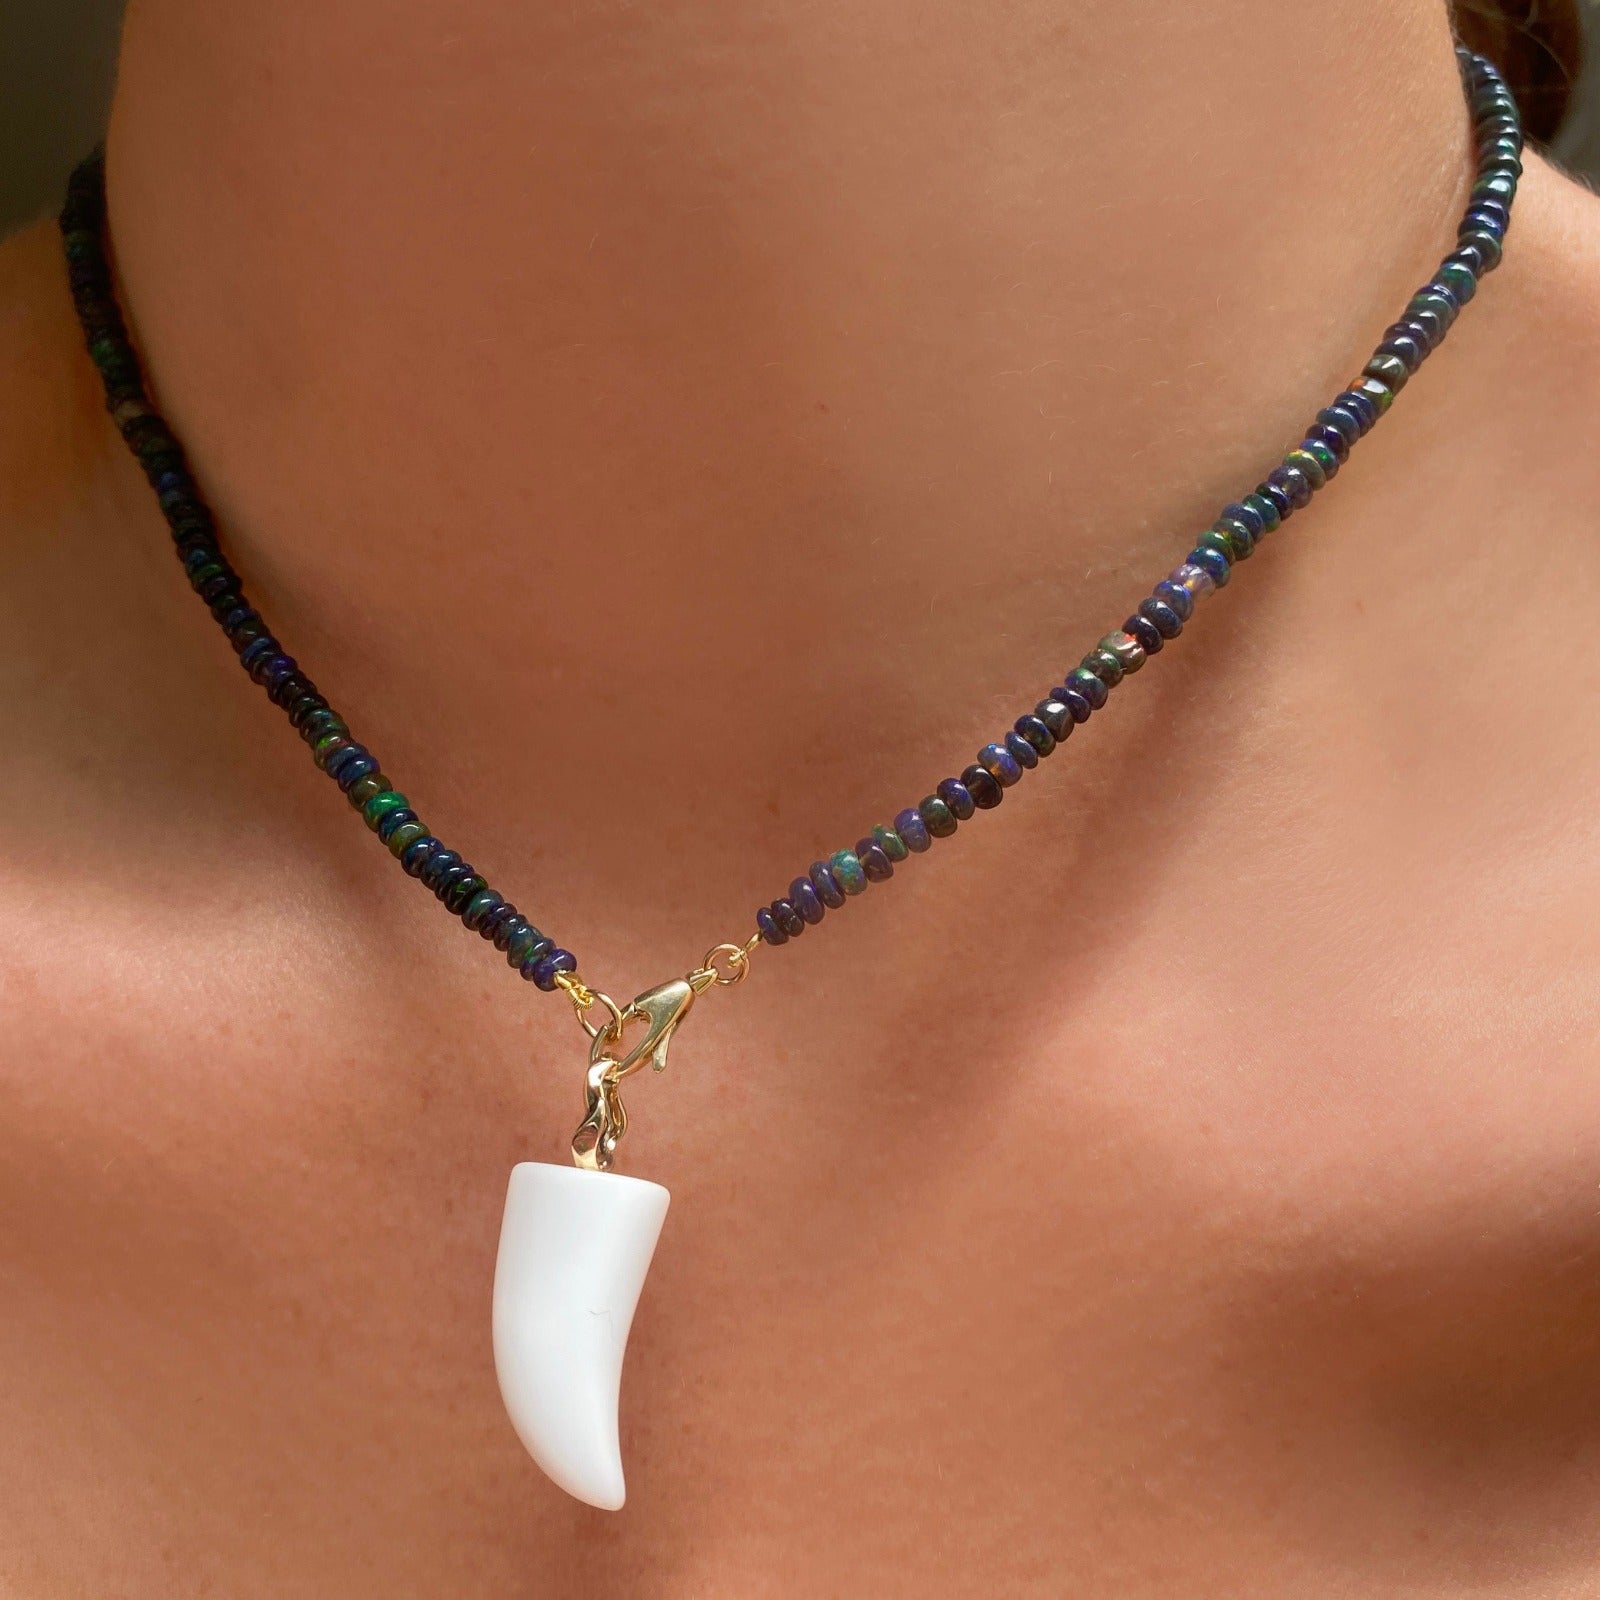 White agate horn charm. Styled on a neck hanging from the lobster clasp of a beaded necklace.